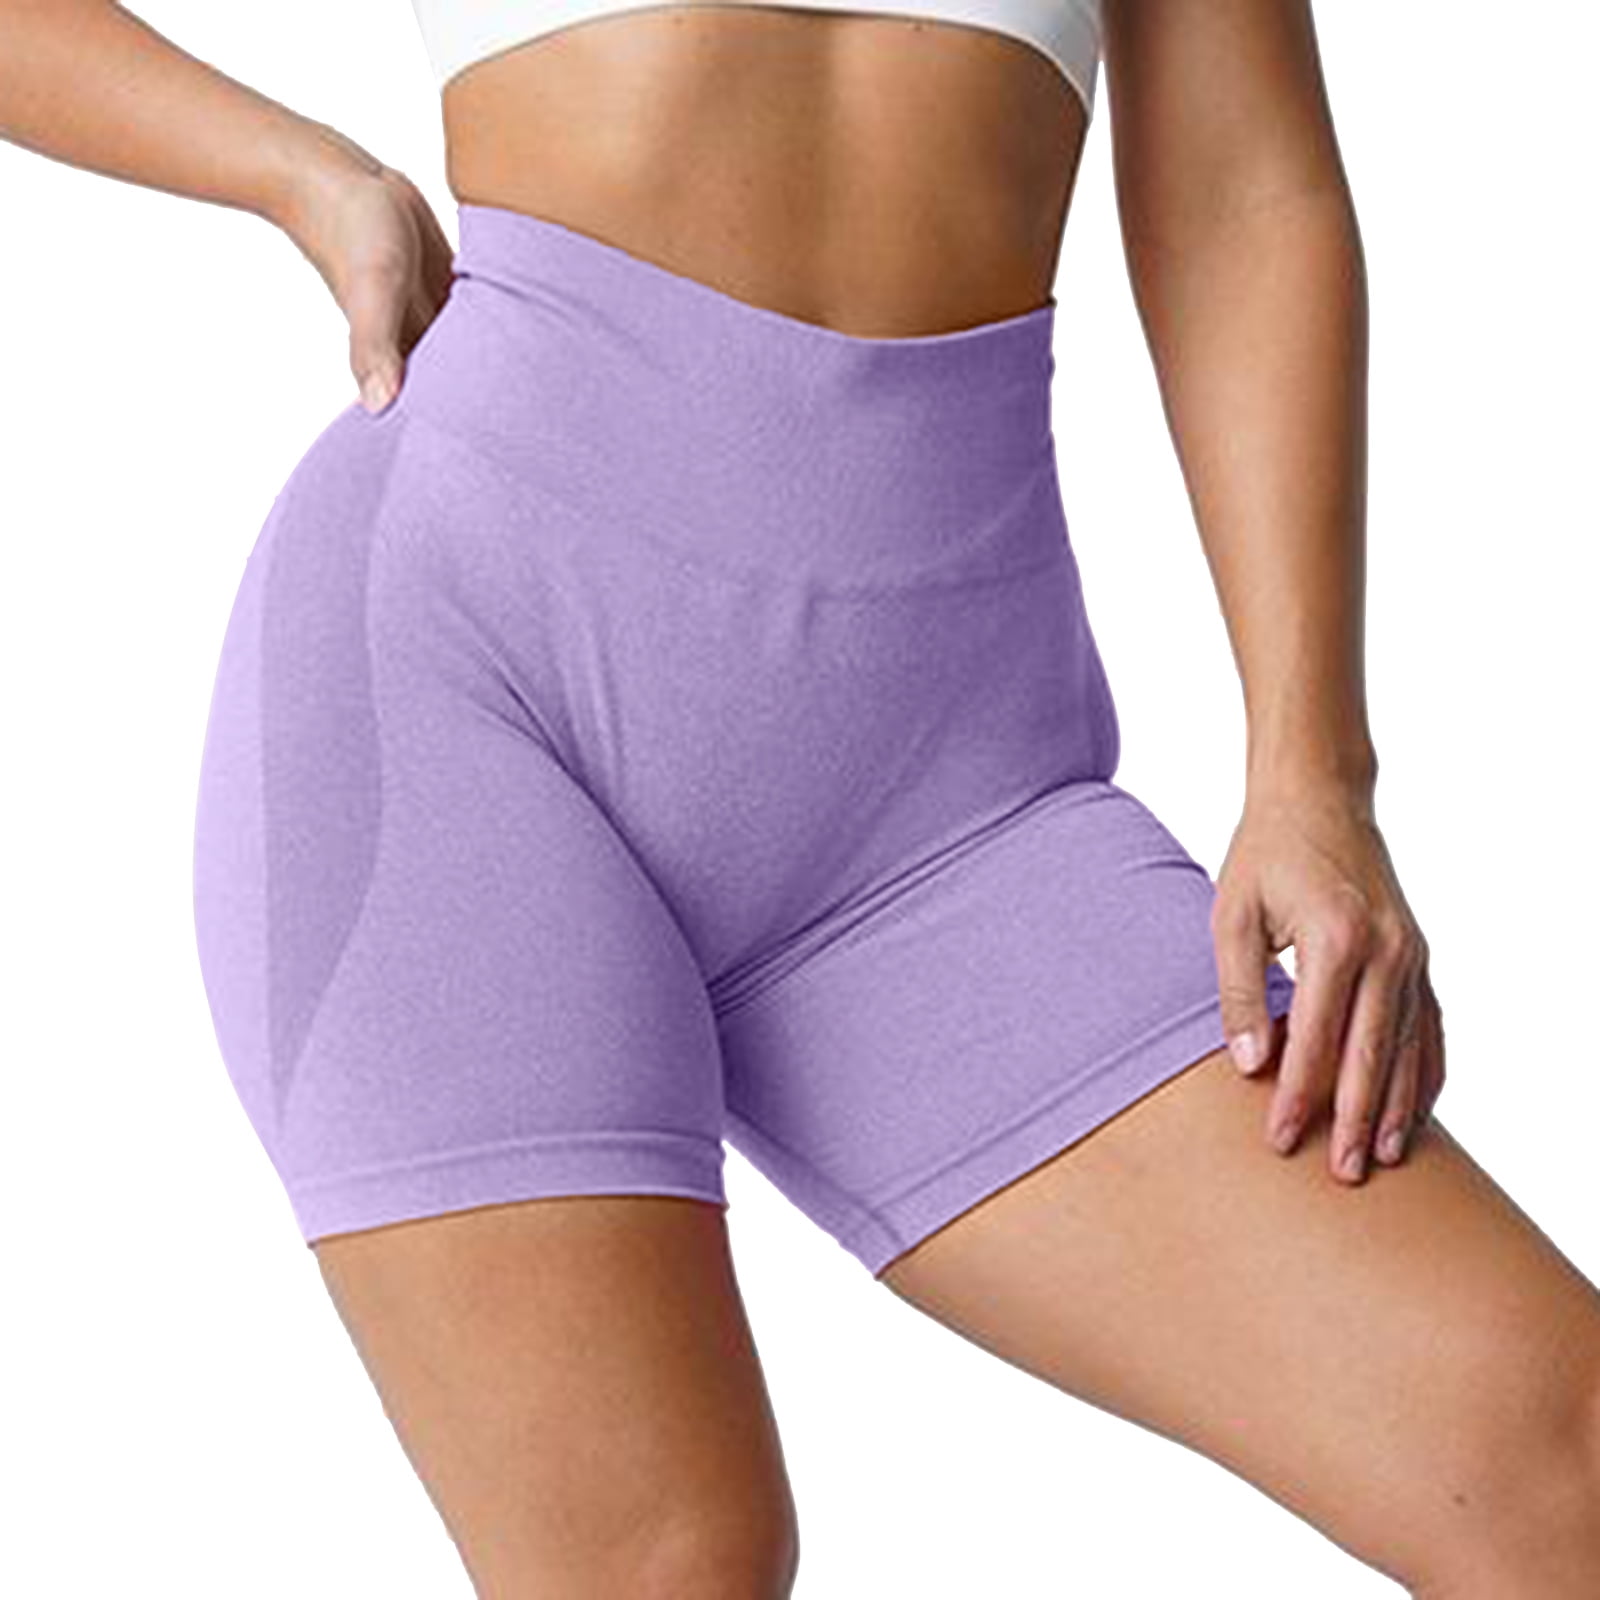 adviicd Short Pants For Girls Yoga Pants Trinity Workout Biker Shorts for  Women Tummy Control High Waisted Exercise Gym Running Yoga Shorts Beige L